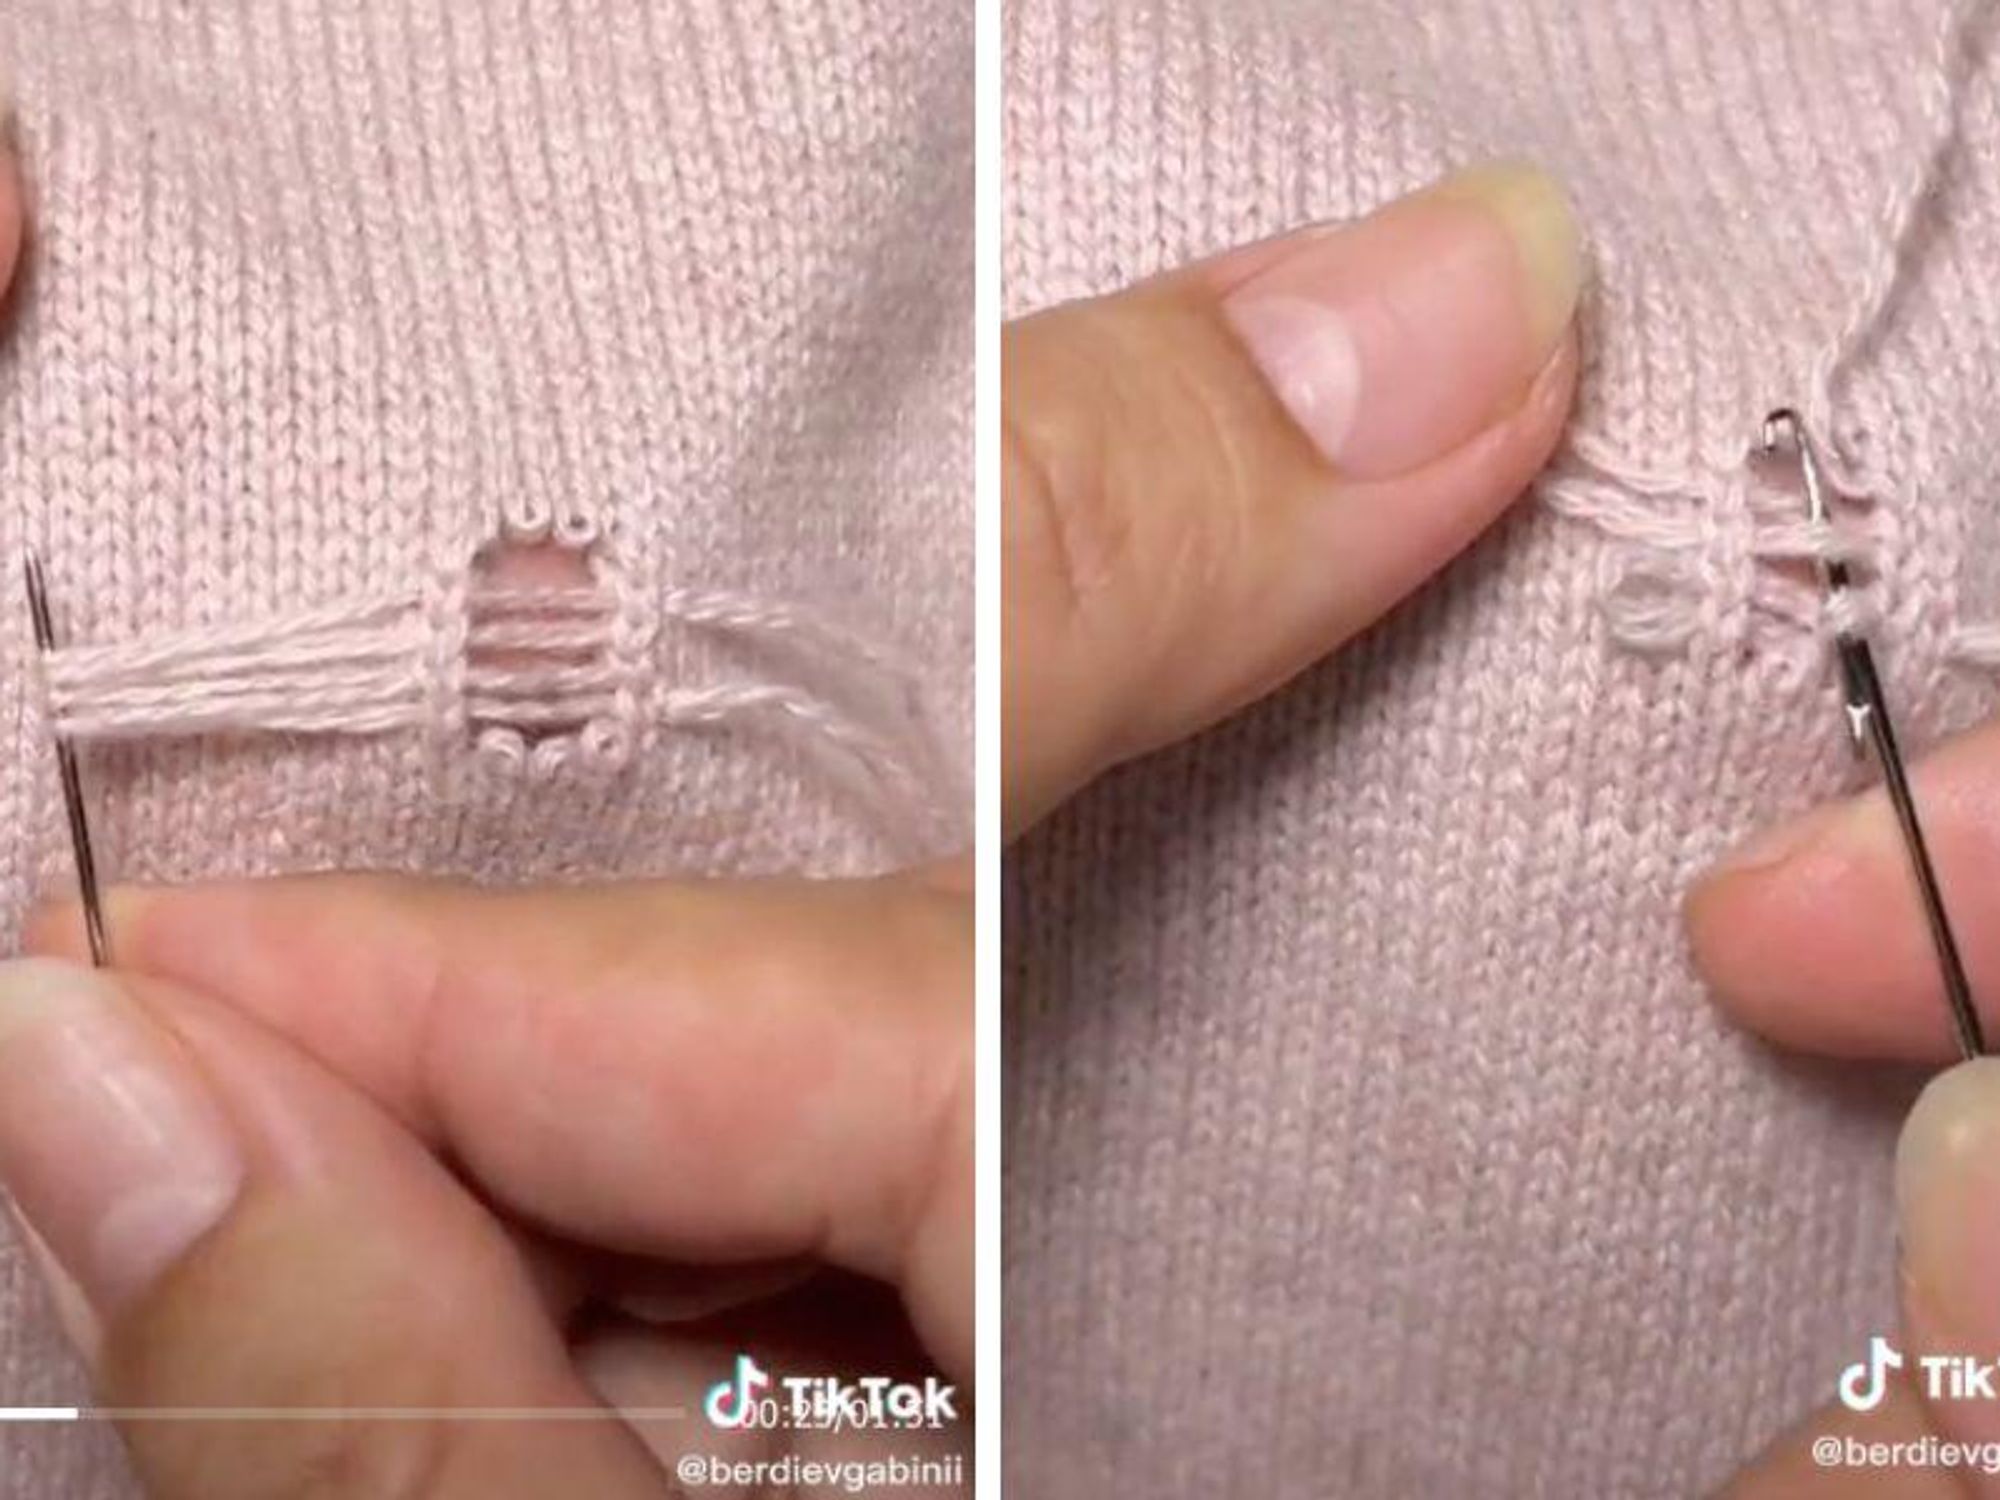 How to fix a hole in a knit sweater in two minutes - Upworthy